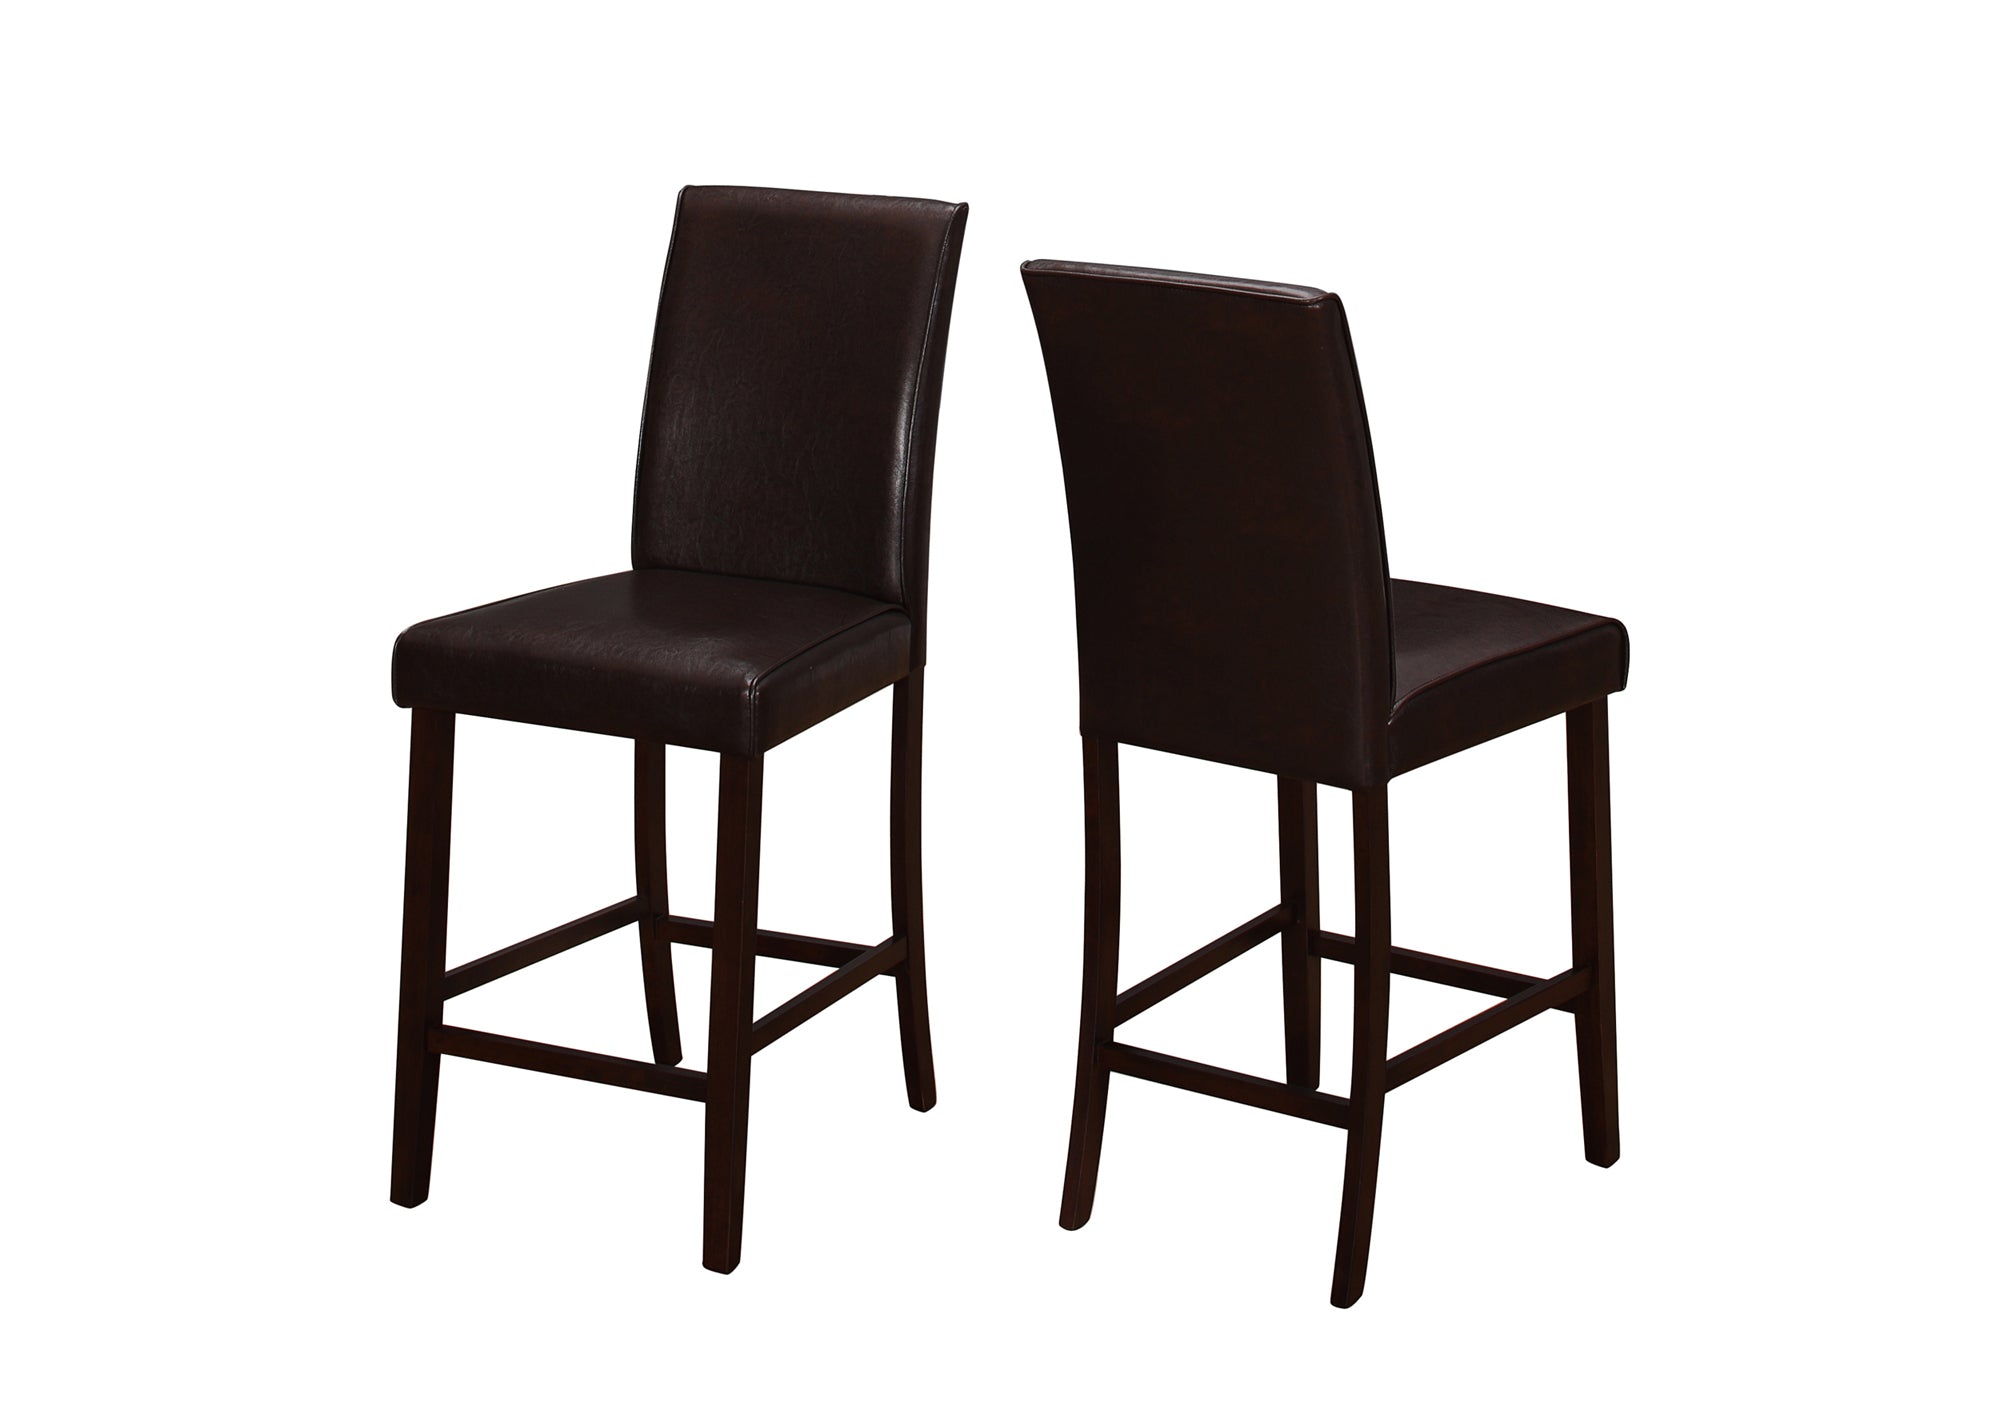 Dining Chair - 2Pcs / Brown Leather-Look Counter Height